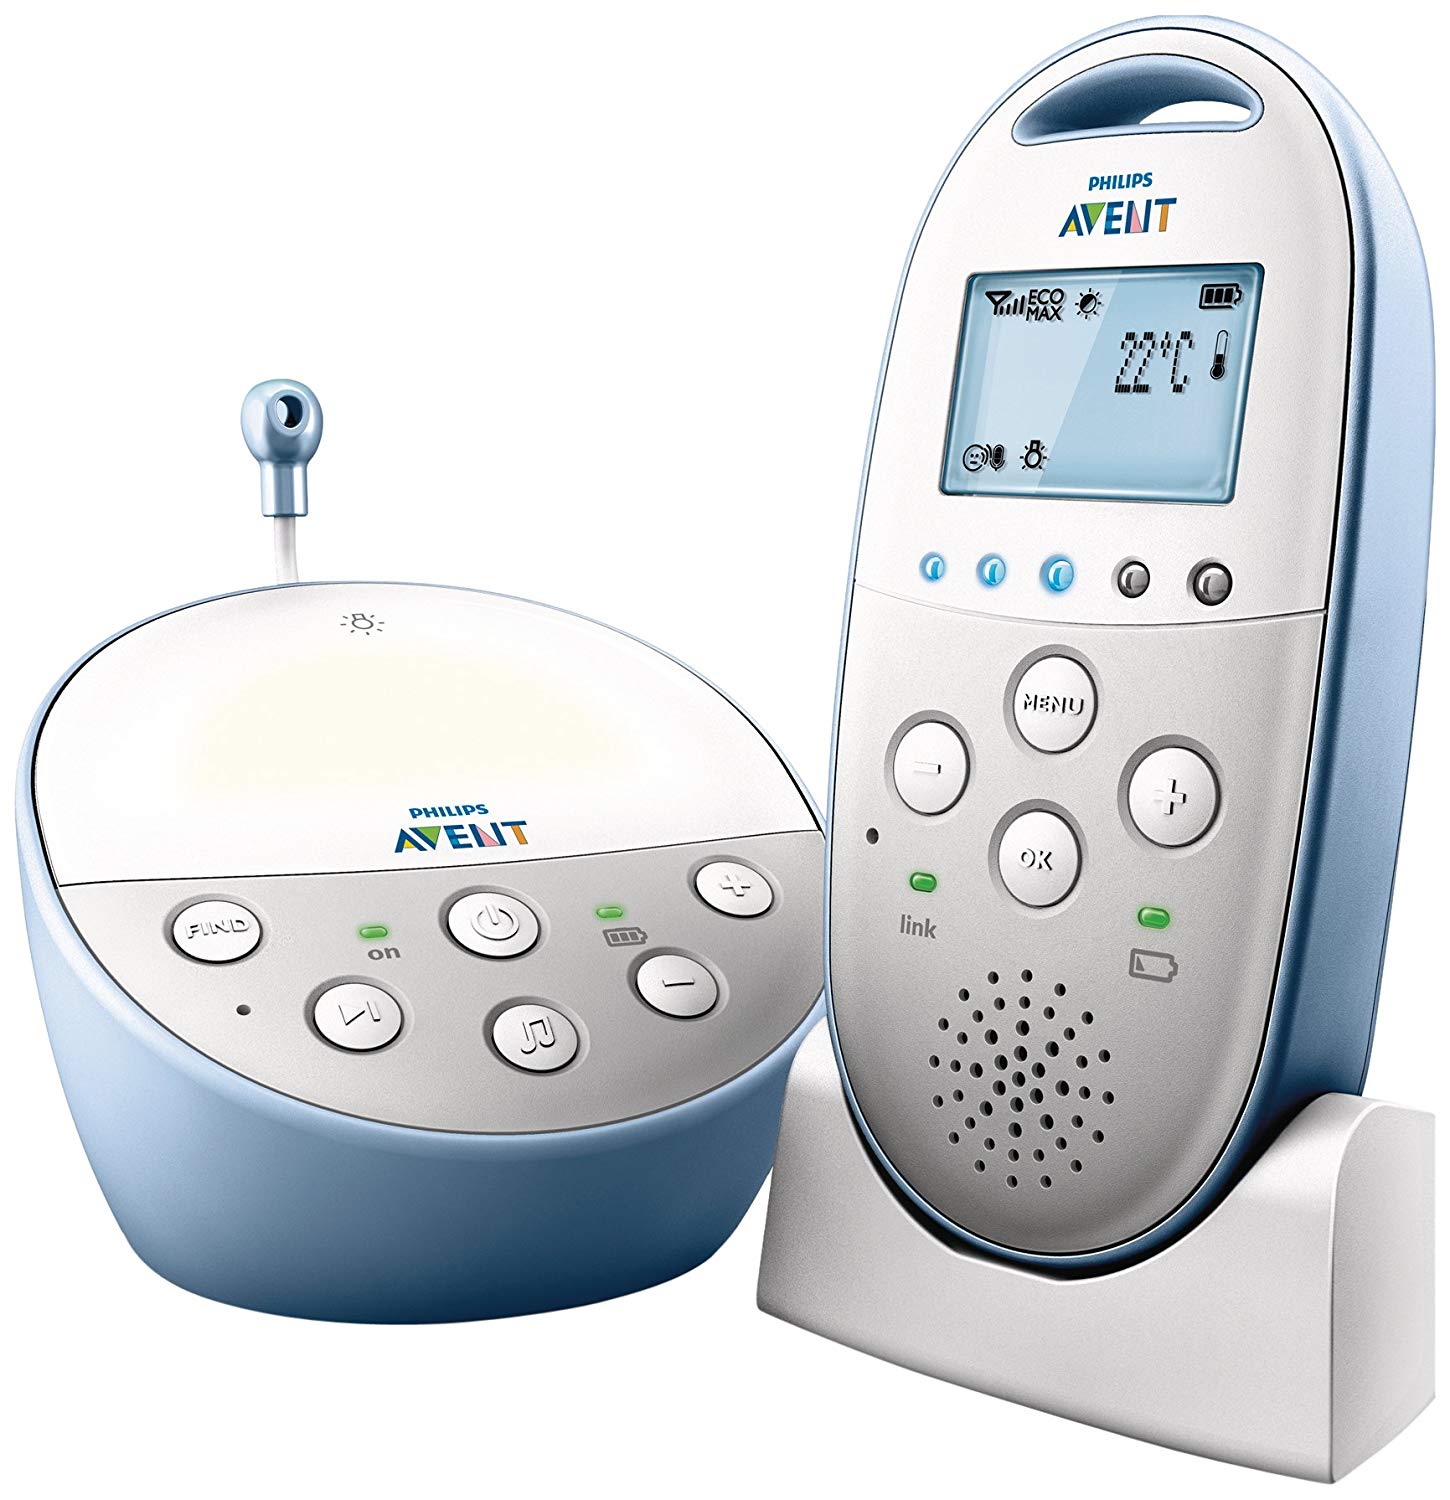 Philips AVENT DECT Baby Monitor SCD570/01 with Light, Lullabies and Vibration Alert